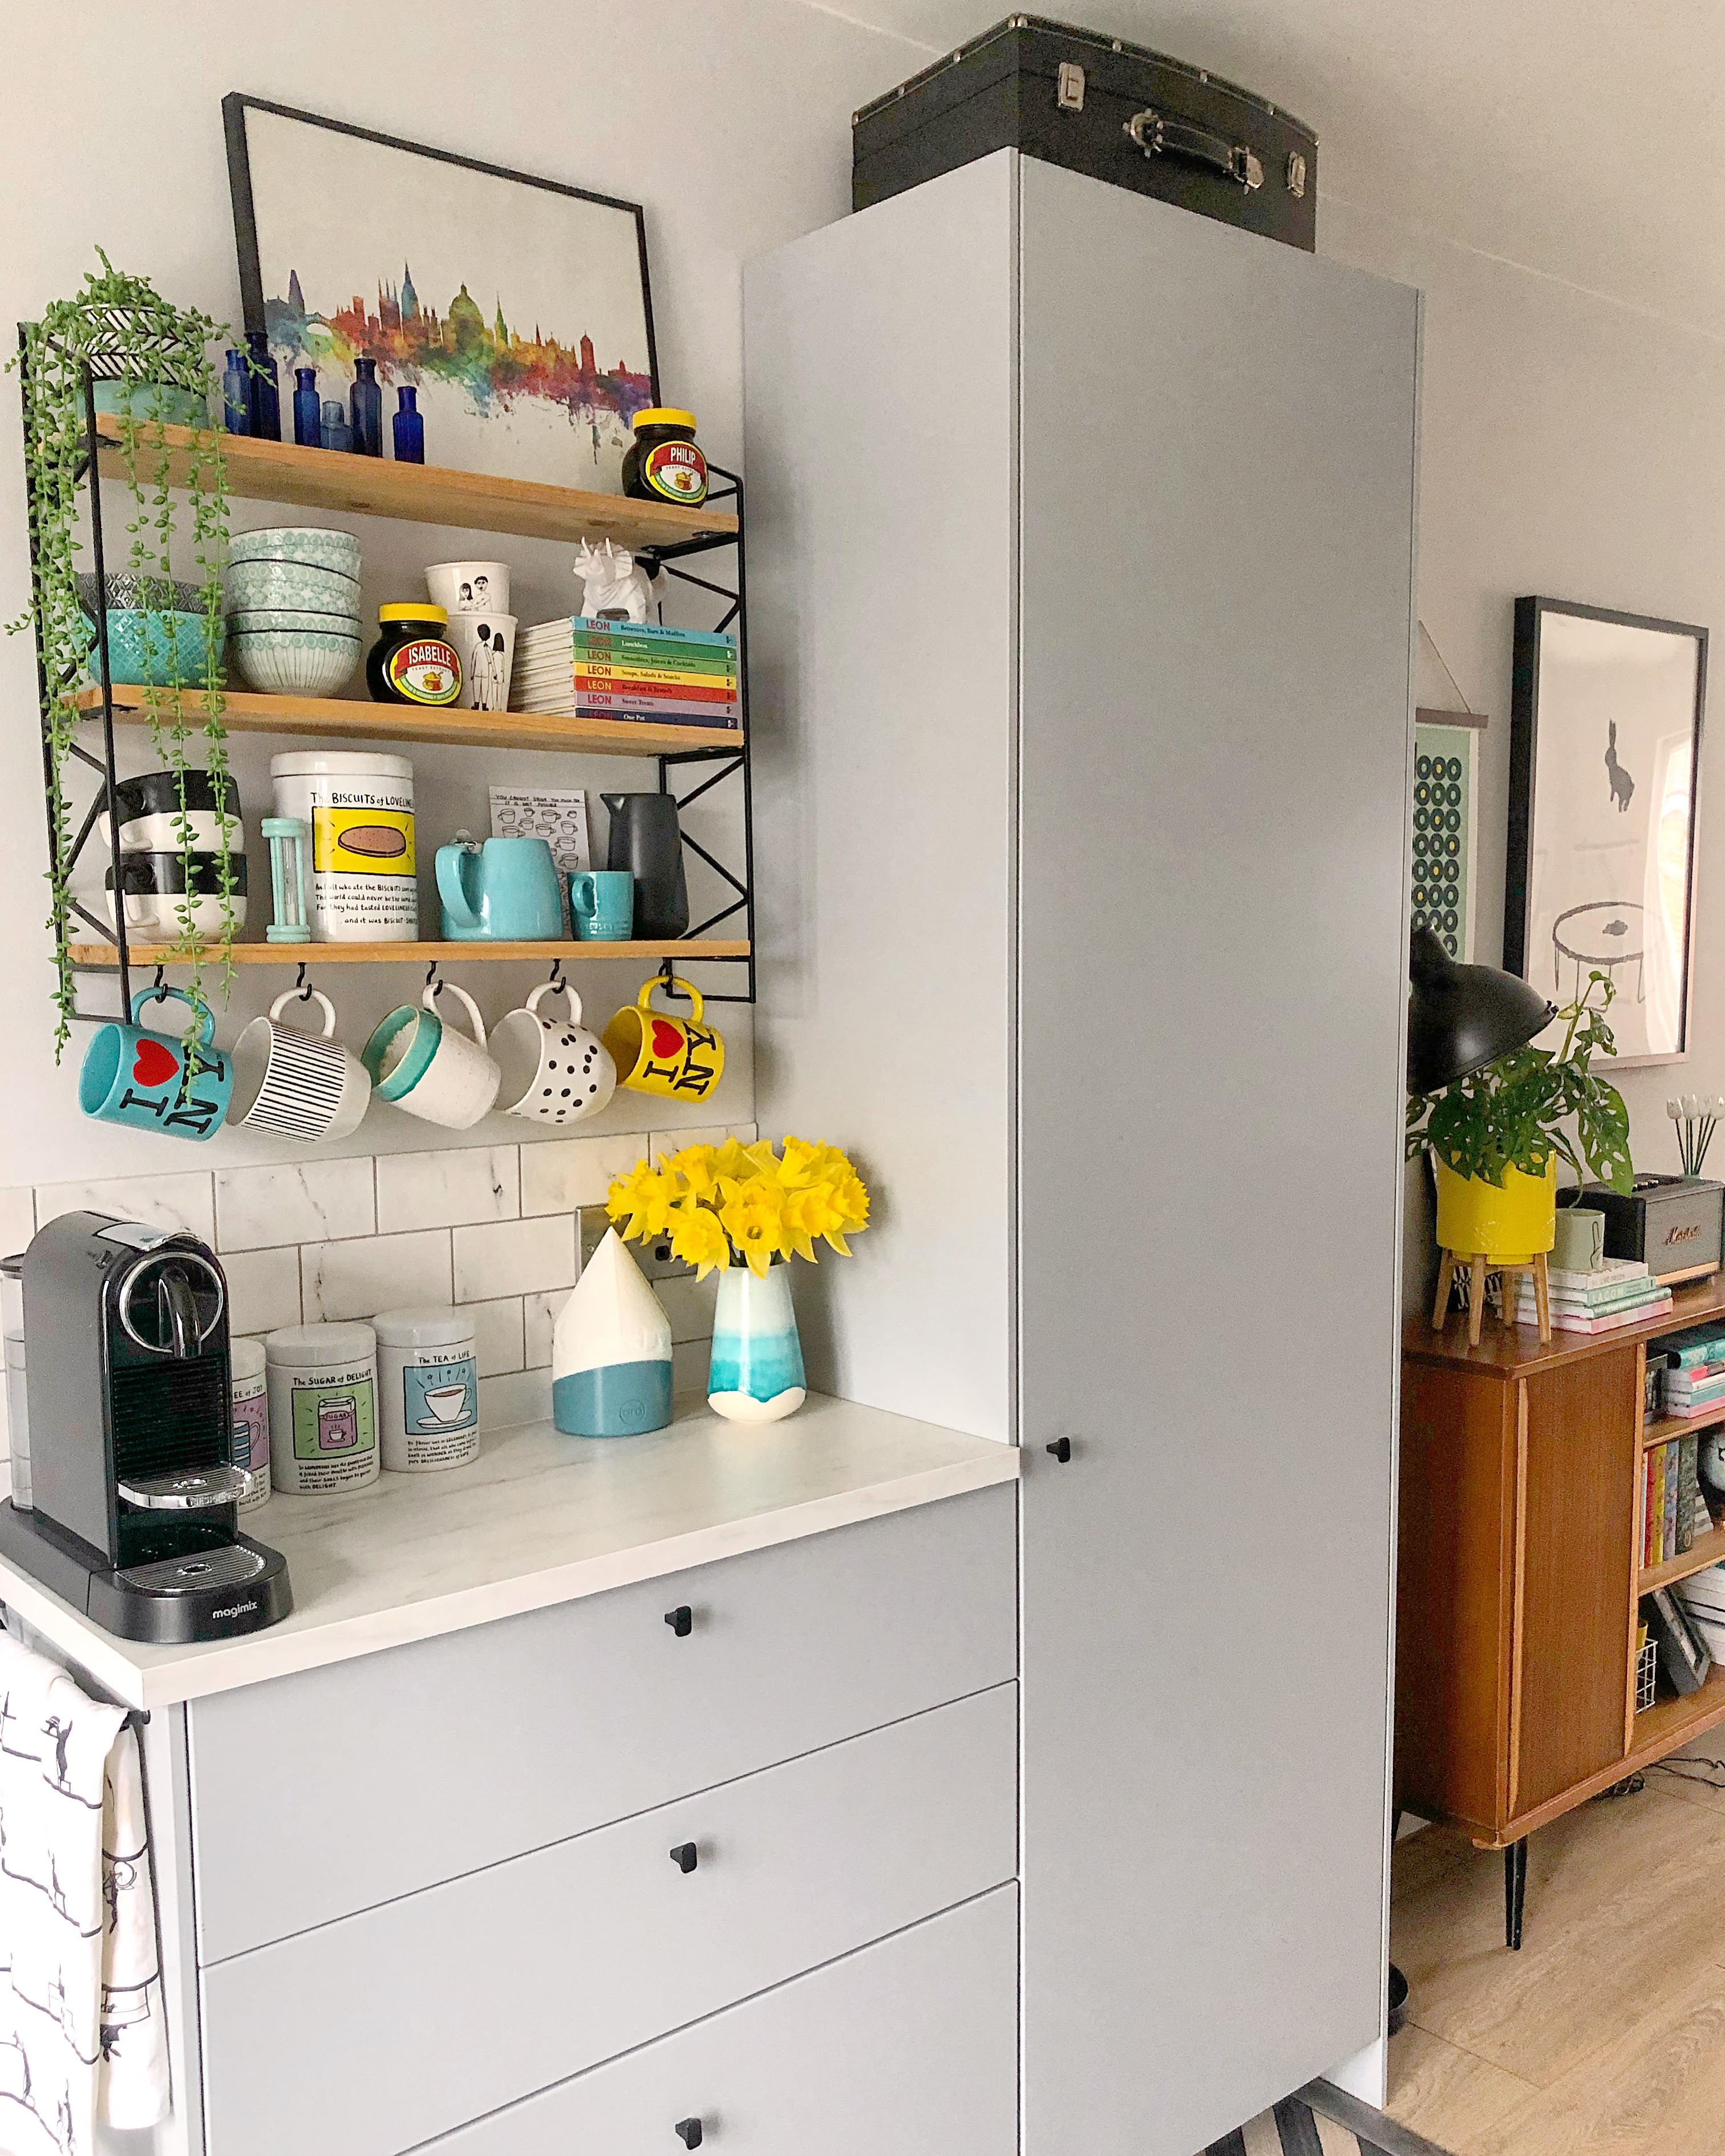 9 Ikea Hacks For Small Kitchens Apartment Therapy,Things You Need For A Housewarming Party